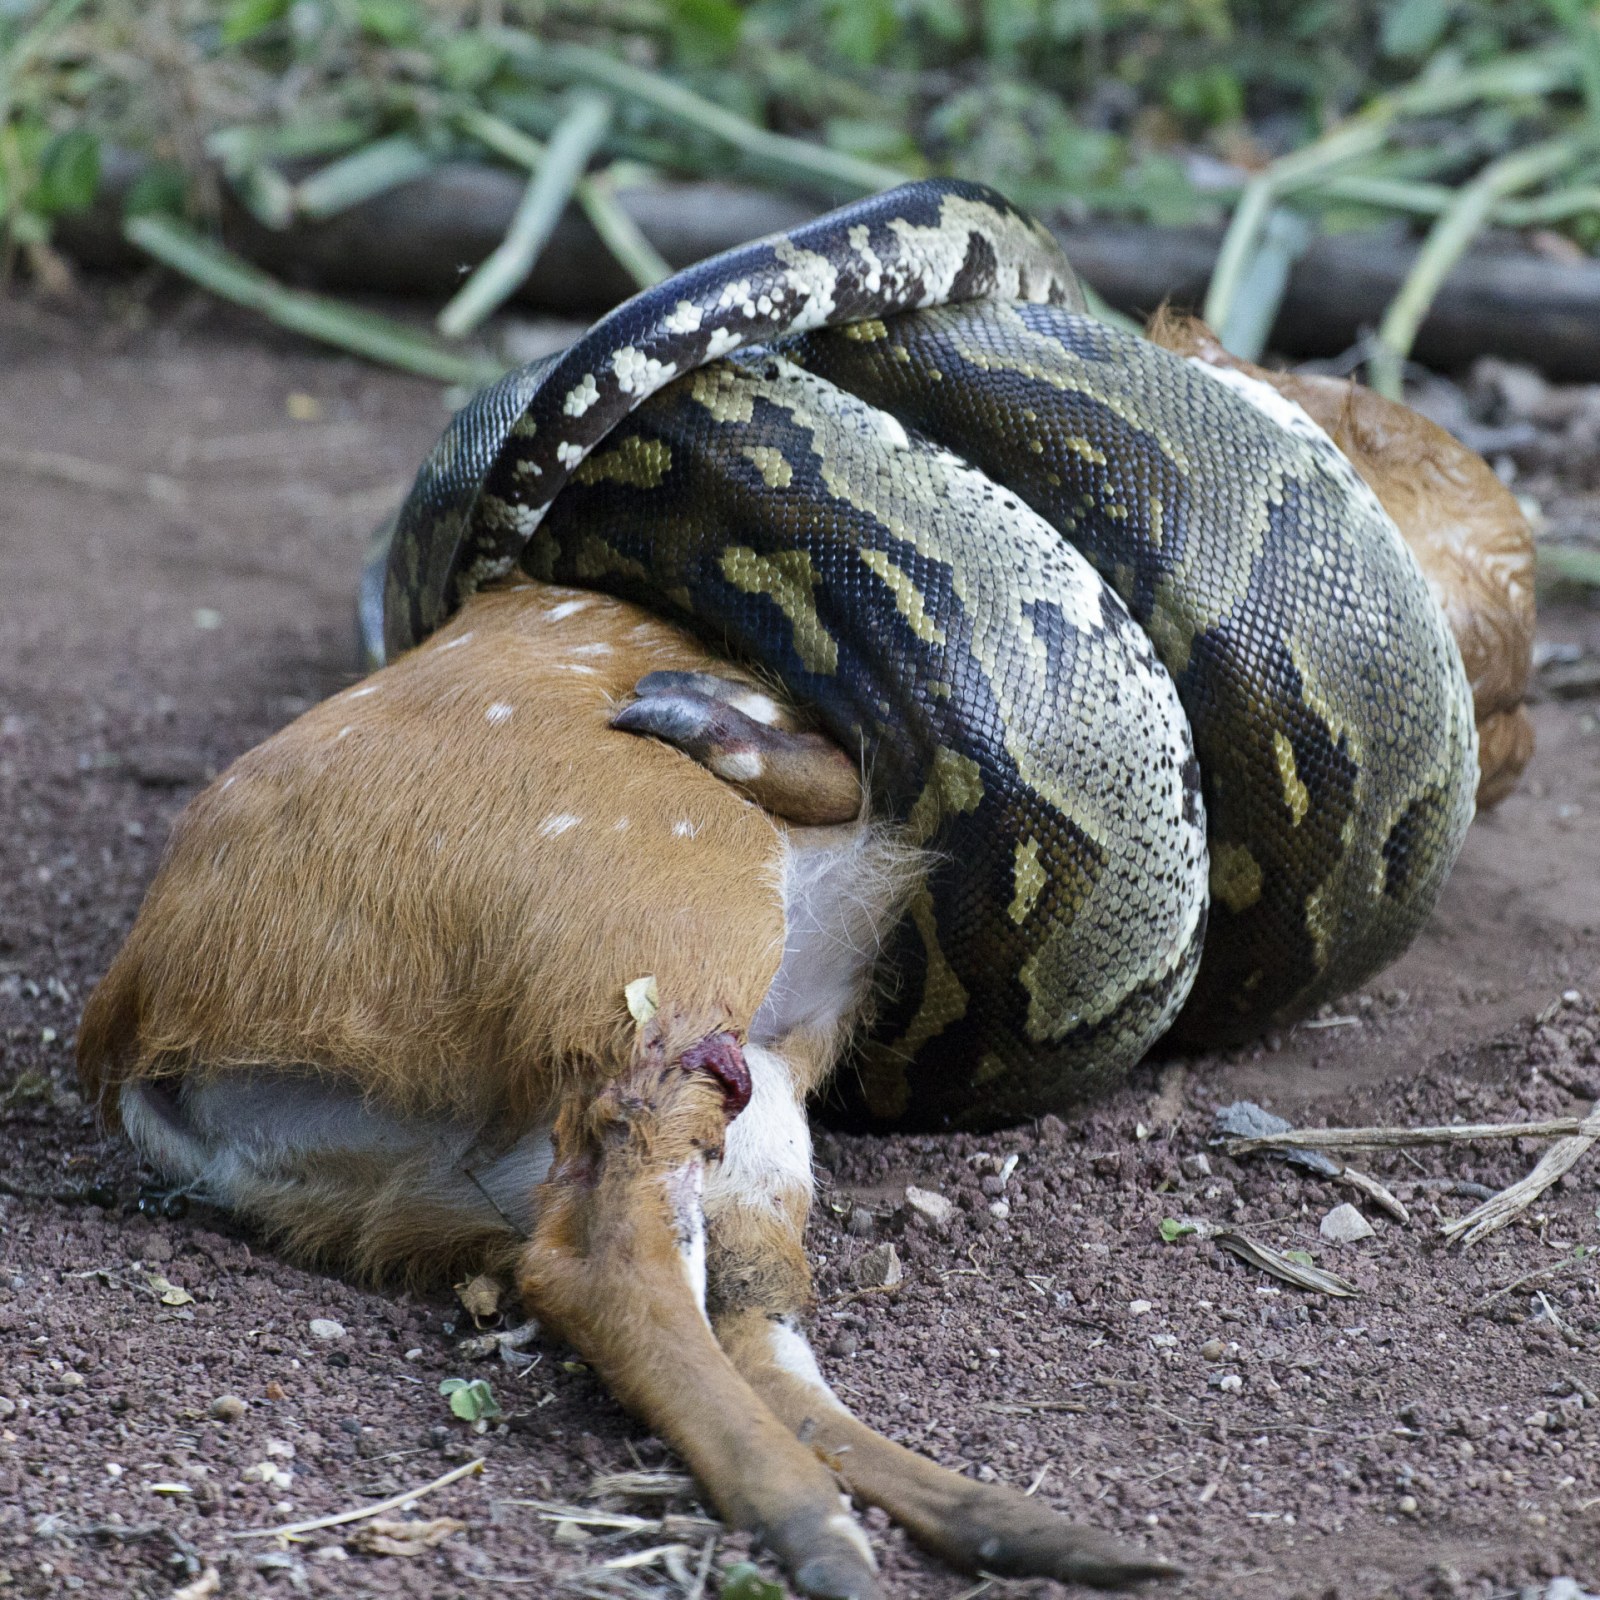 How Boa Constrictors Breathe While Squeezing the Life Out of Their Prey, Science